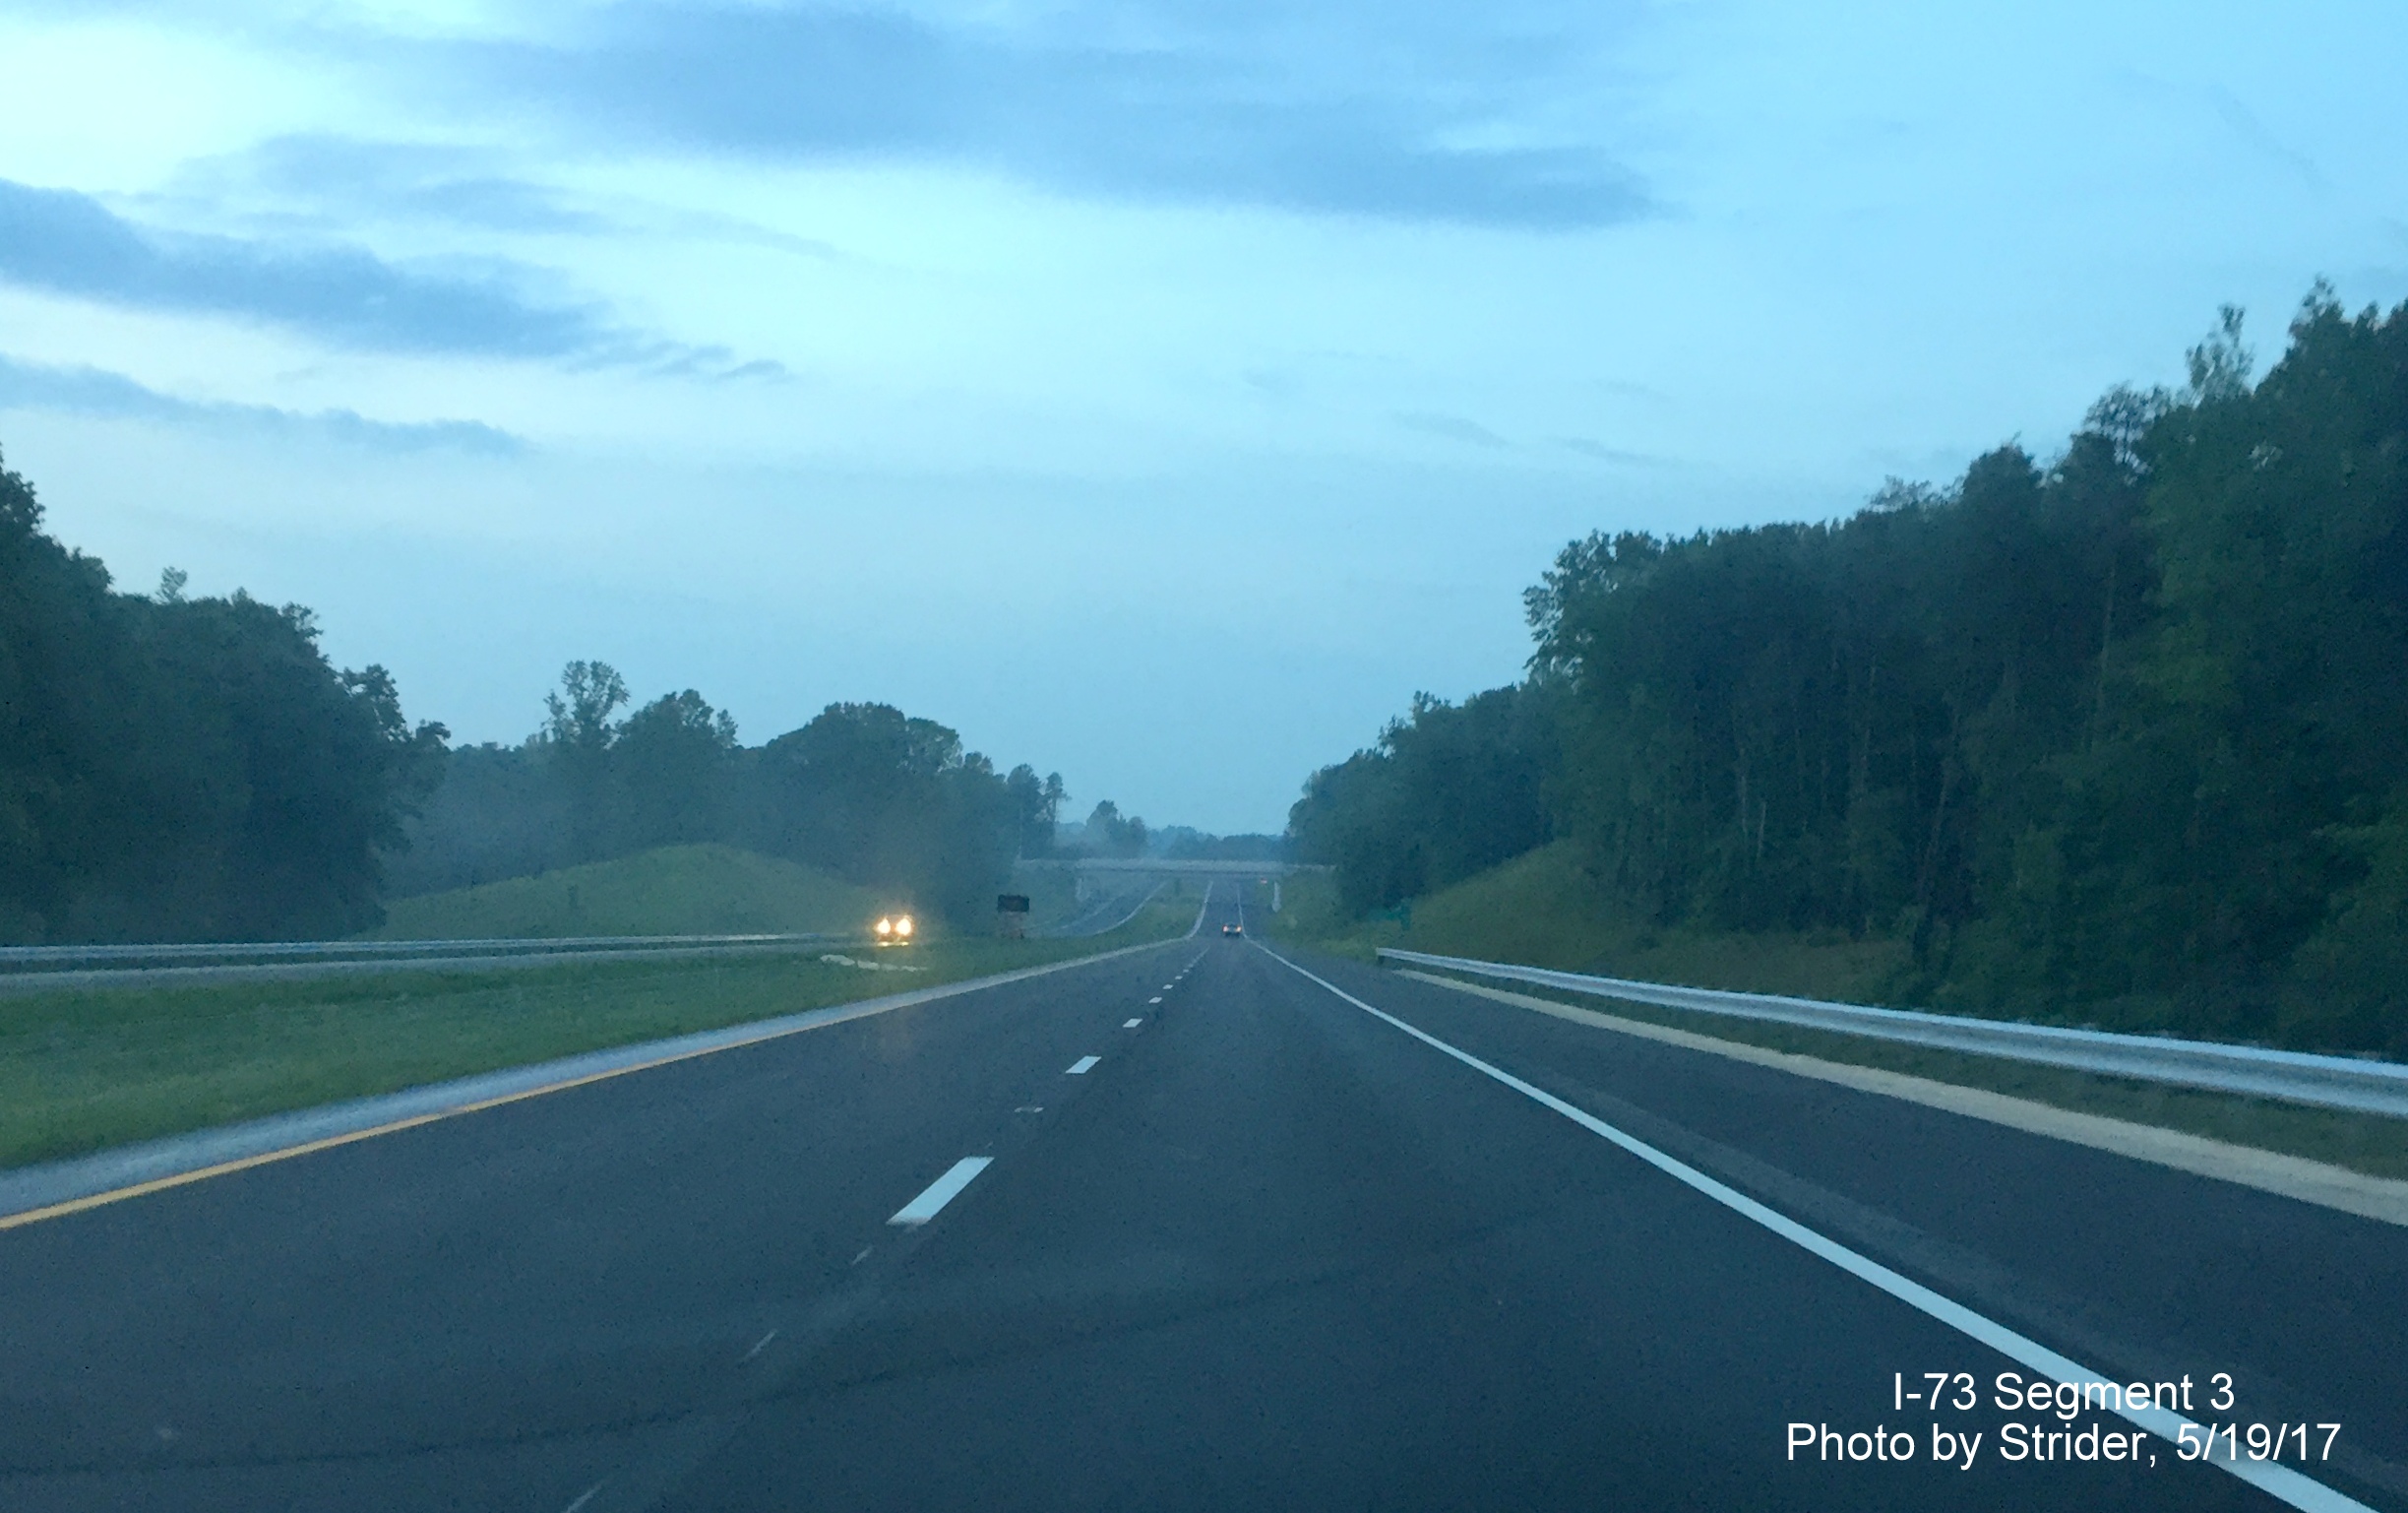 Image taken at dusk of I-73 North between NC 68 and NC 150 in Summerfield, by Strider